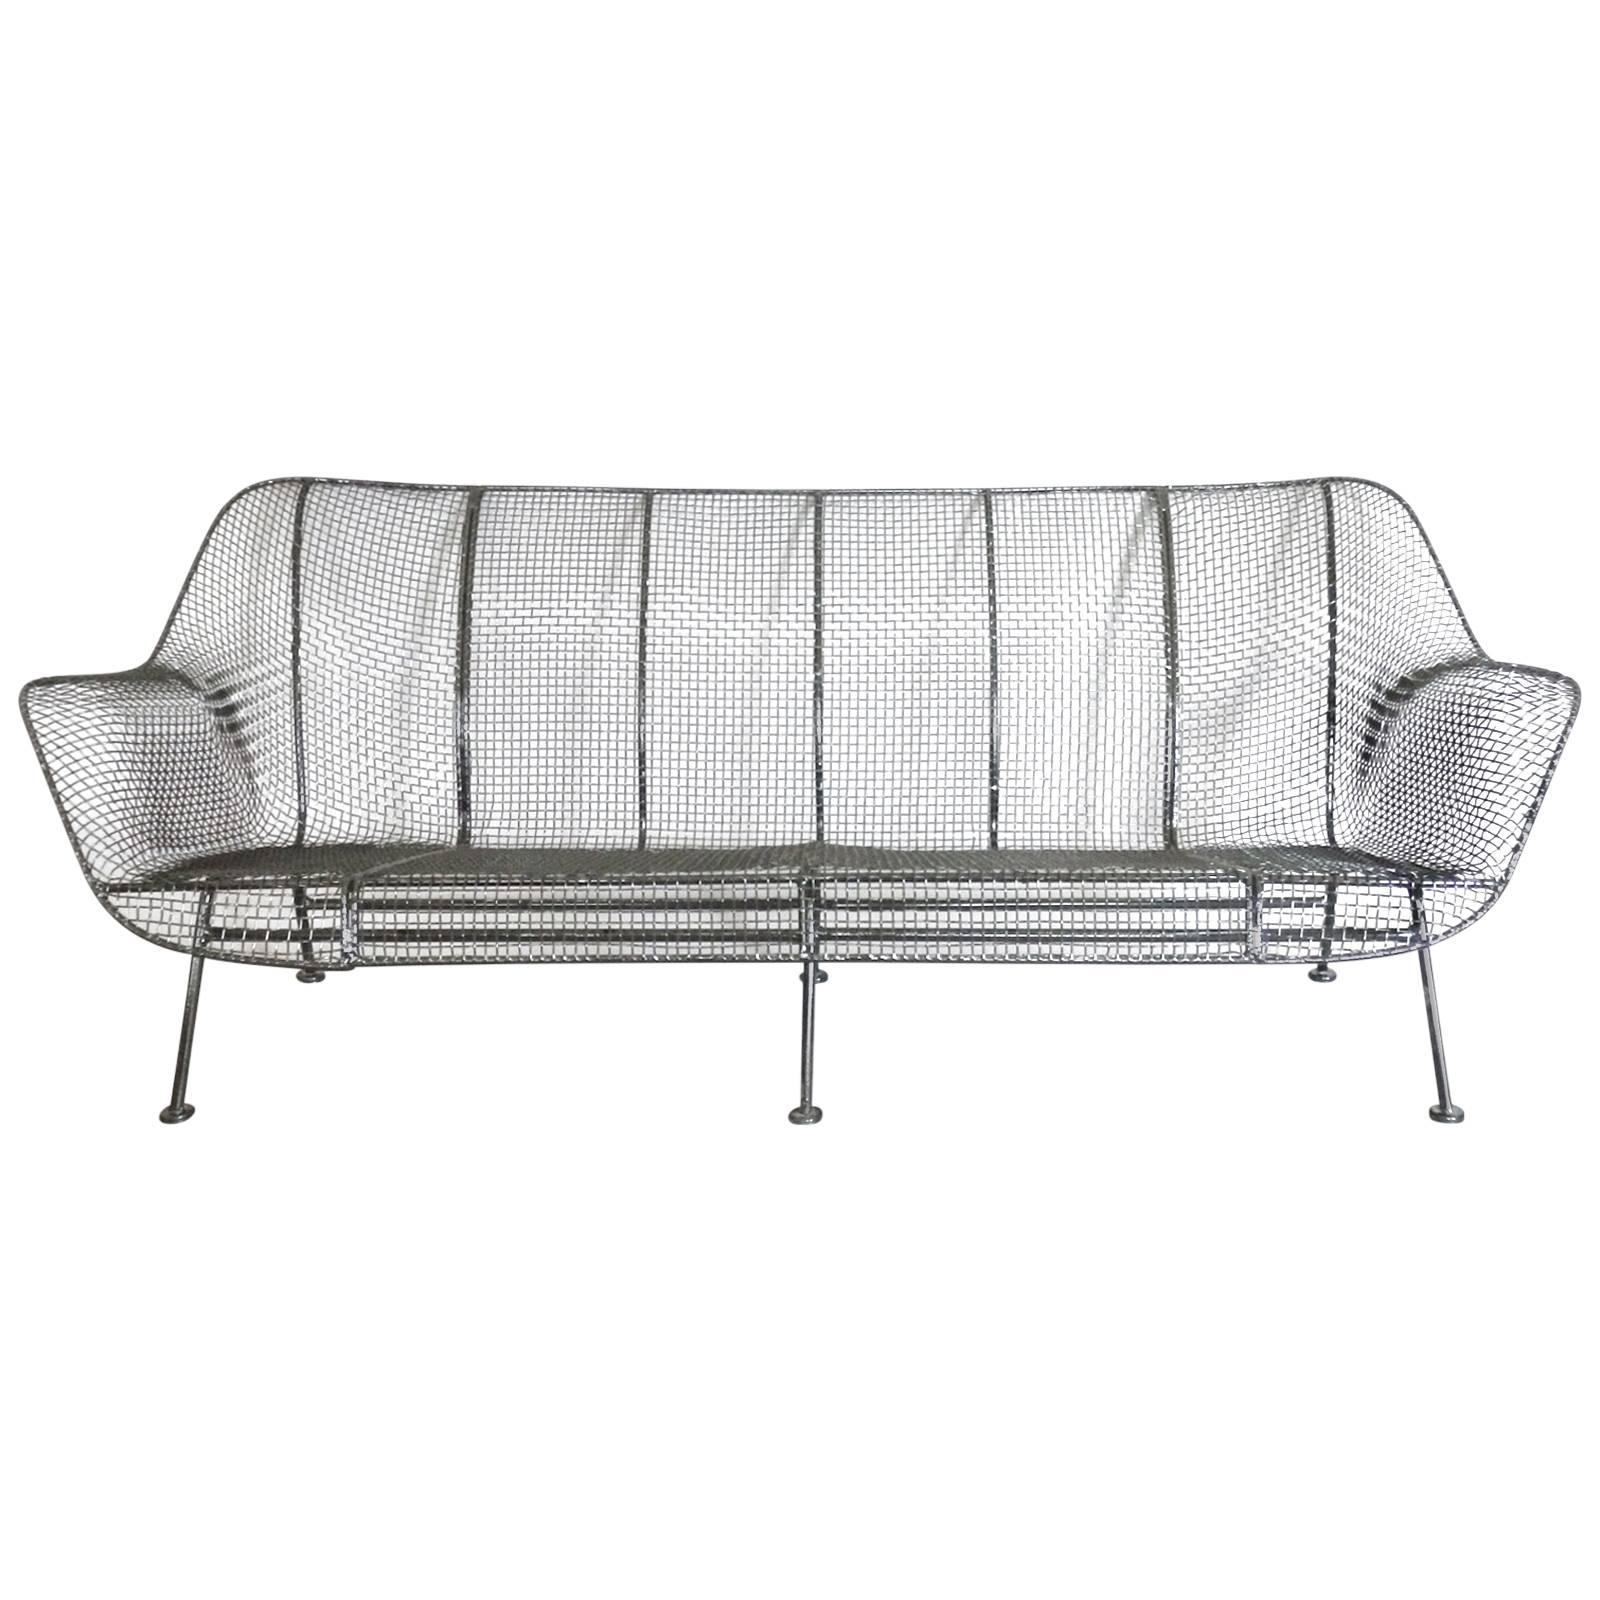 Full Size Woodard Wrought Iron with Steel Mesh Couch